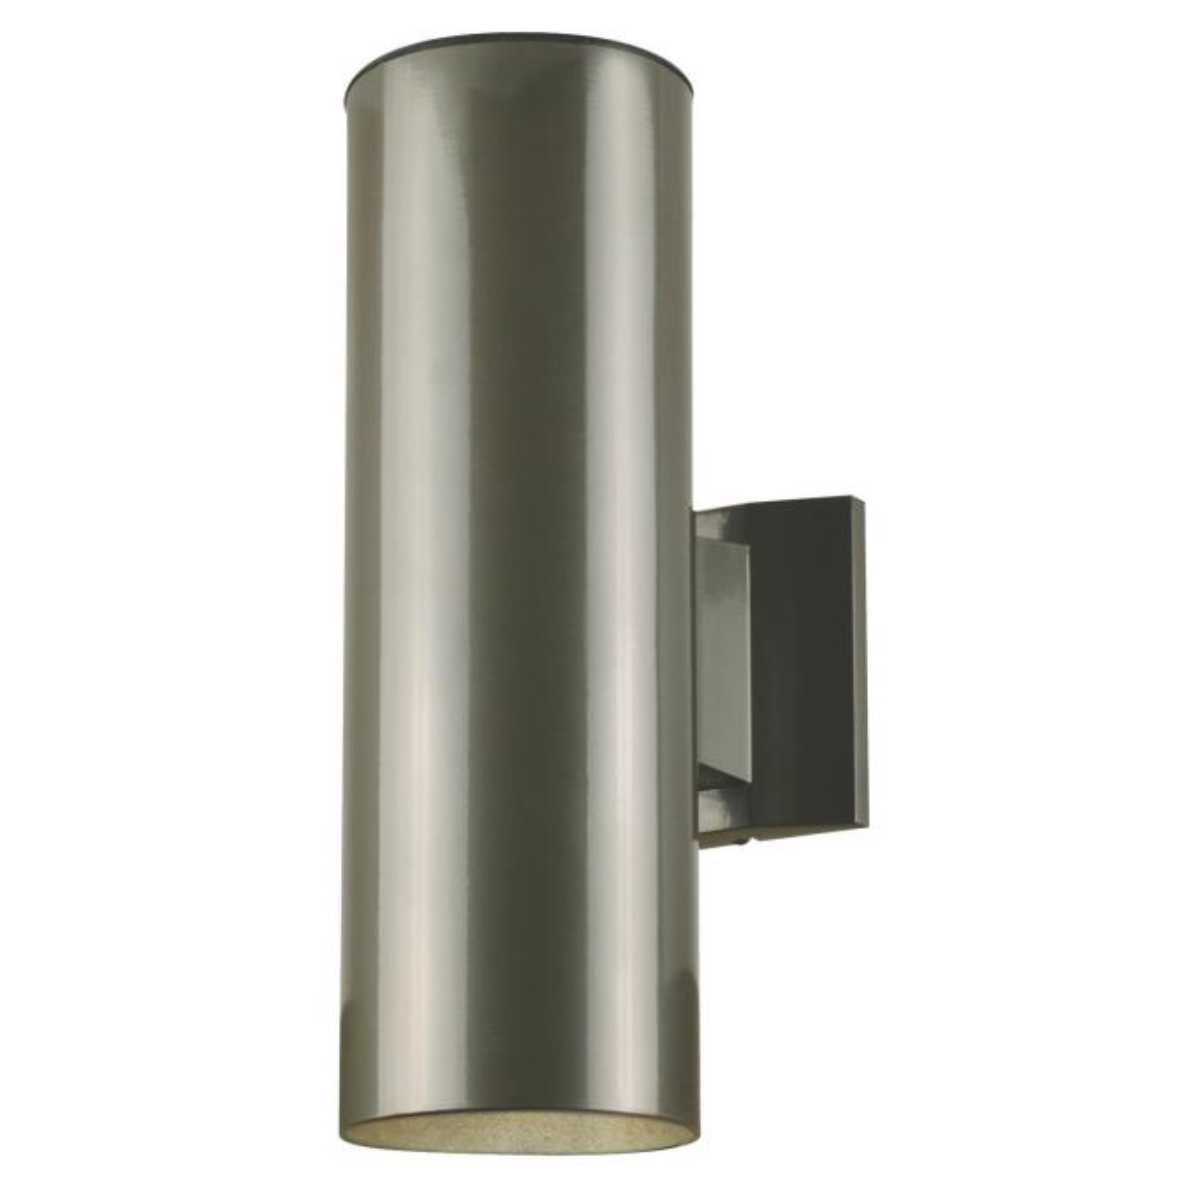 15 In 1 Light Outdoor Cylinder Wall Sconces Graphite Finish